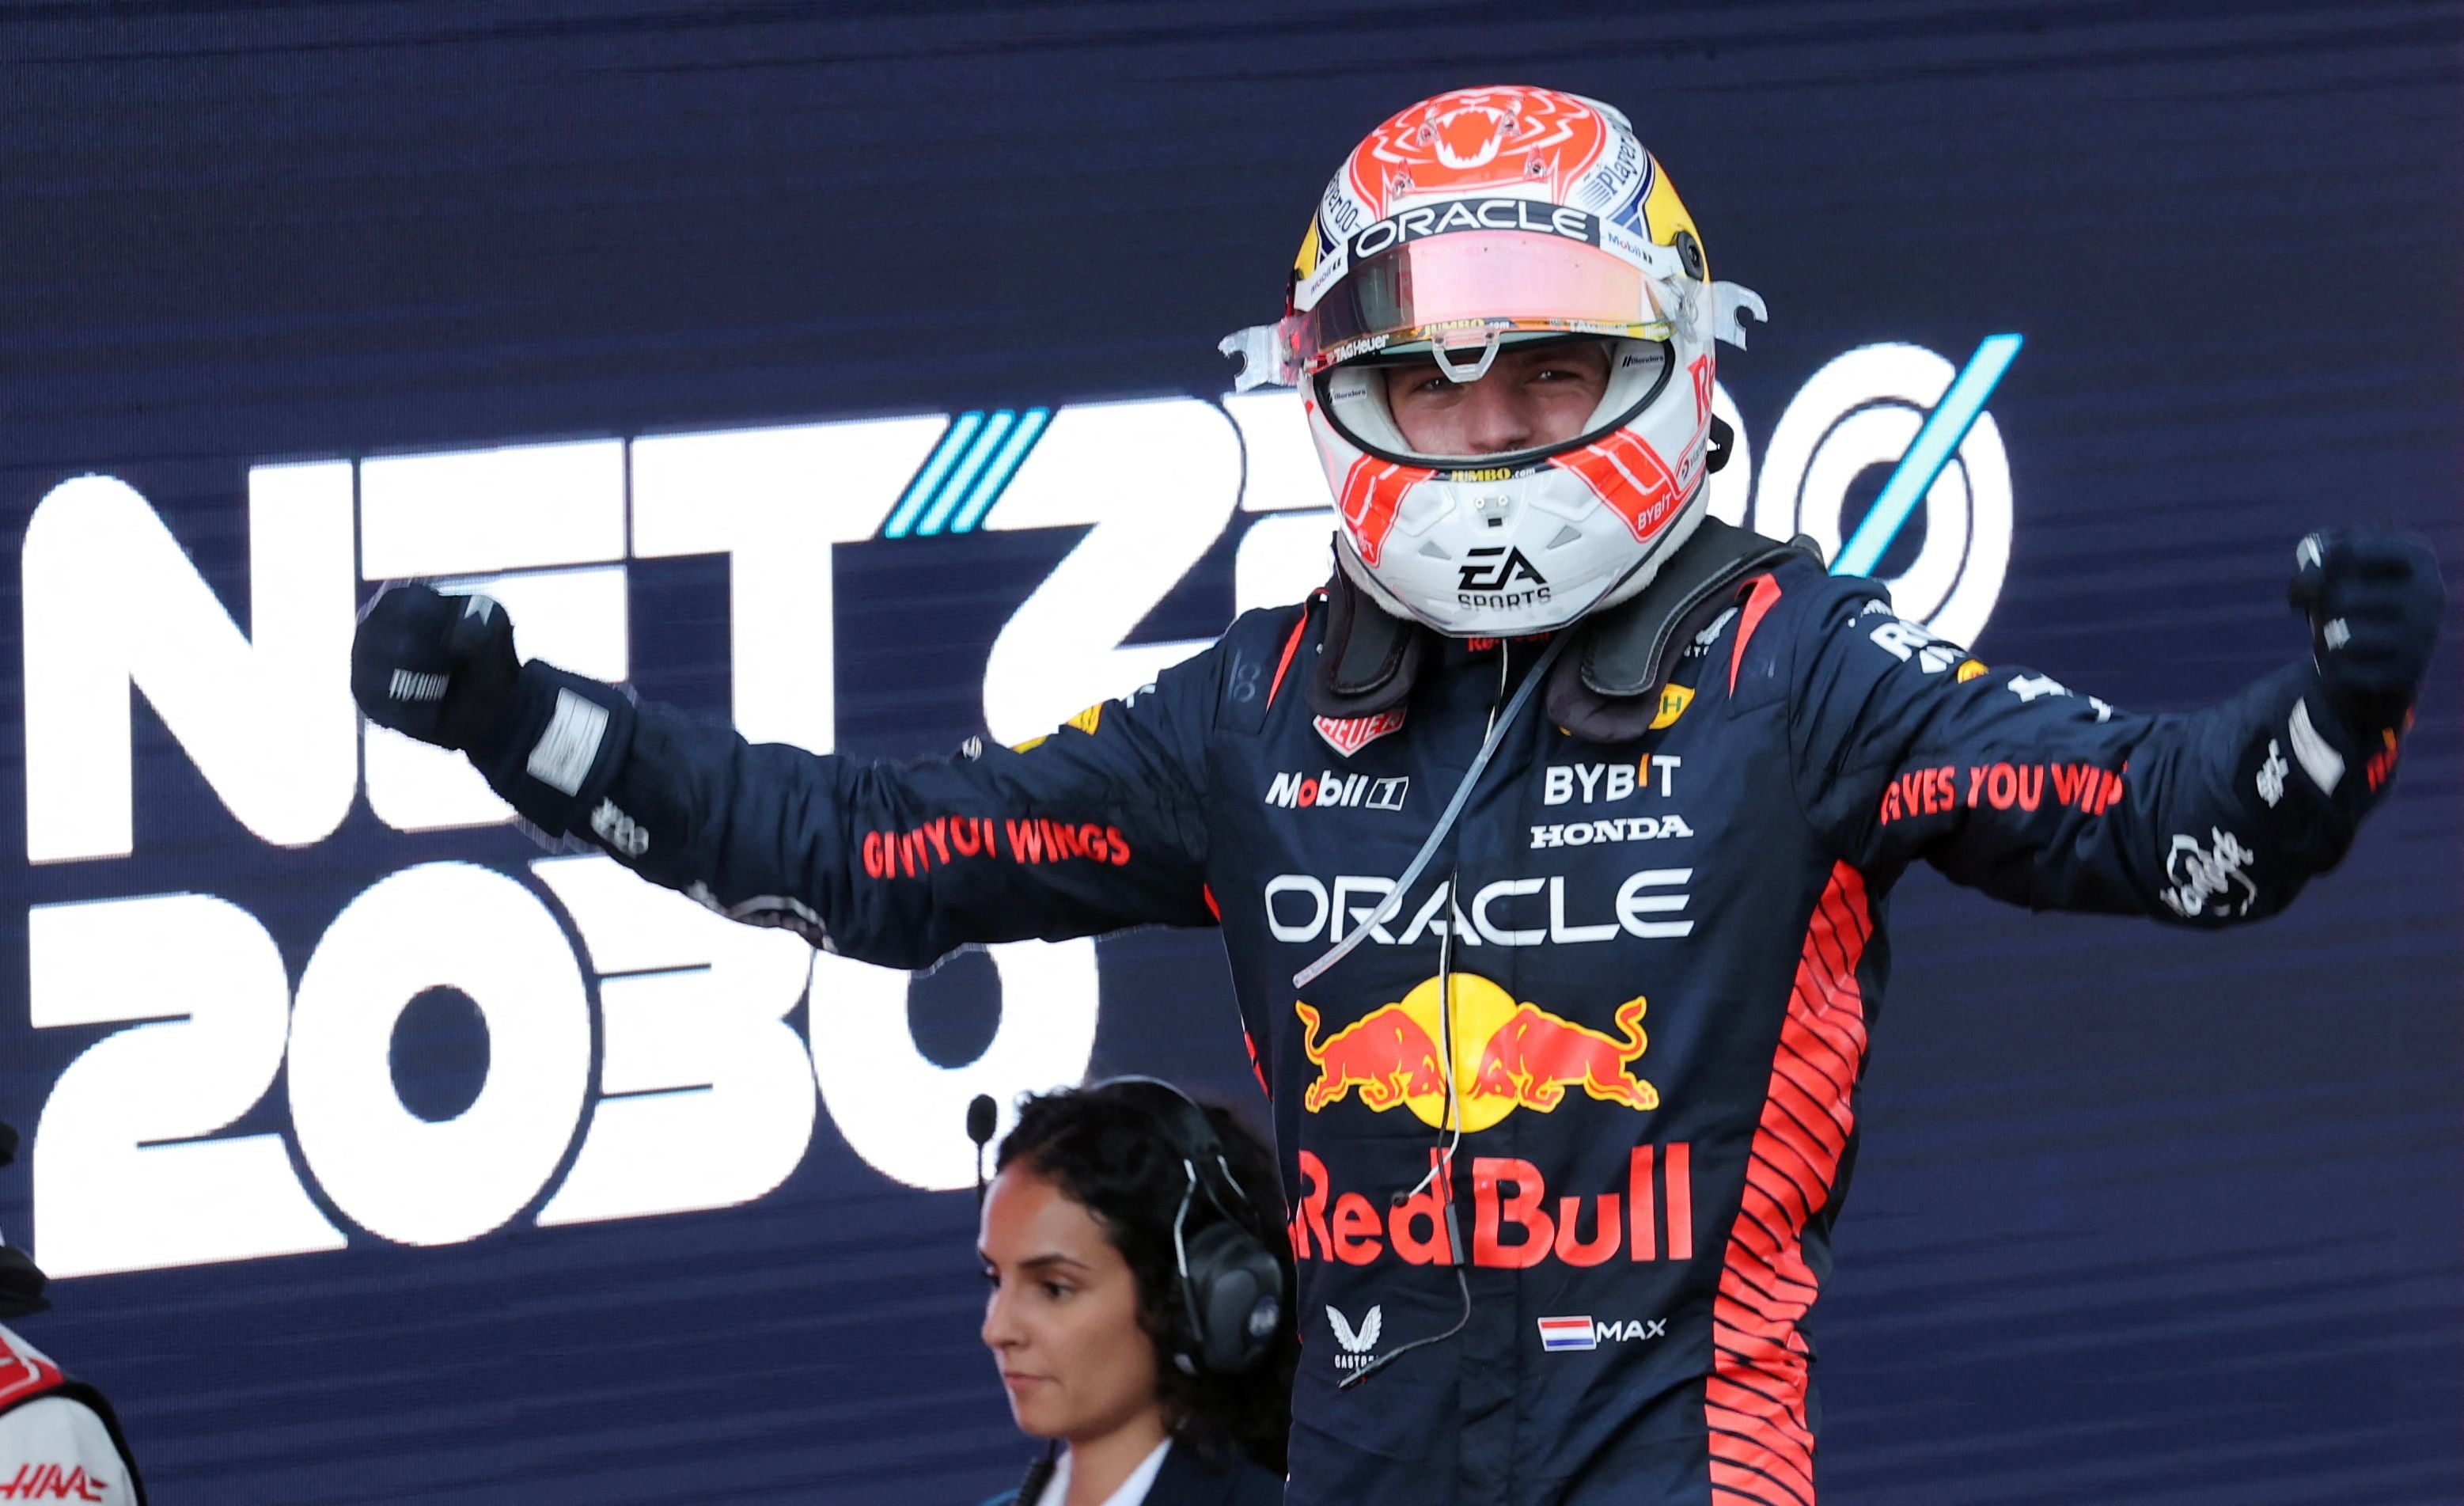 Max Verstappen cruised to another victory as Red Bull maintained their 100 per cent win rate this season